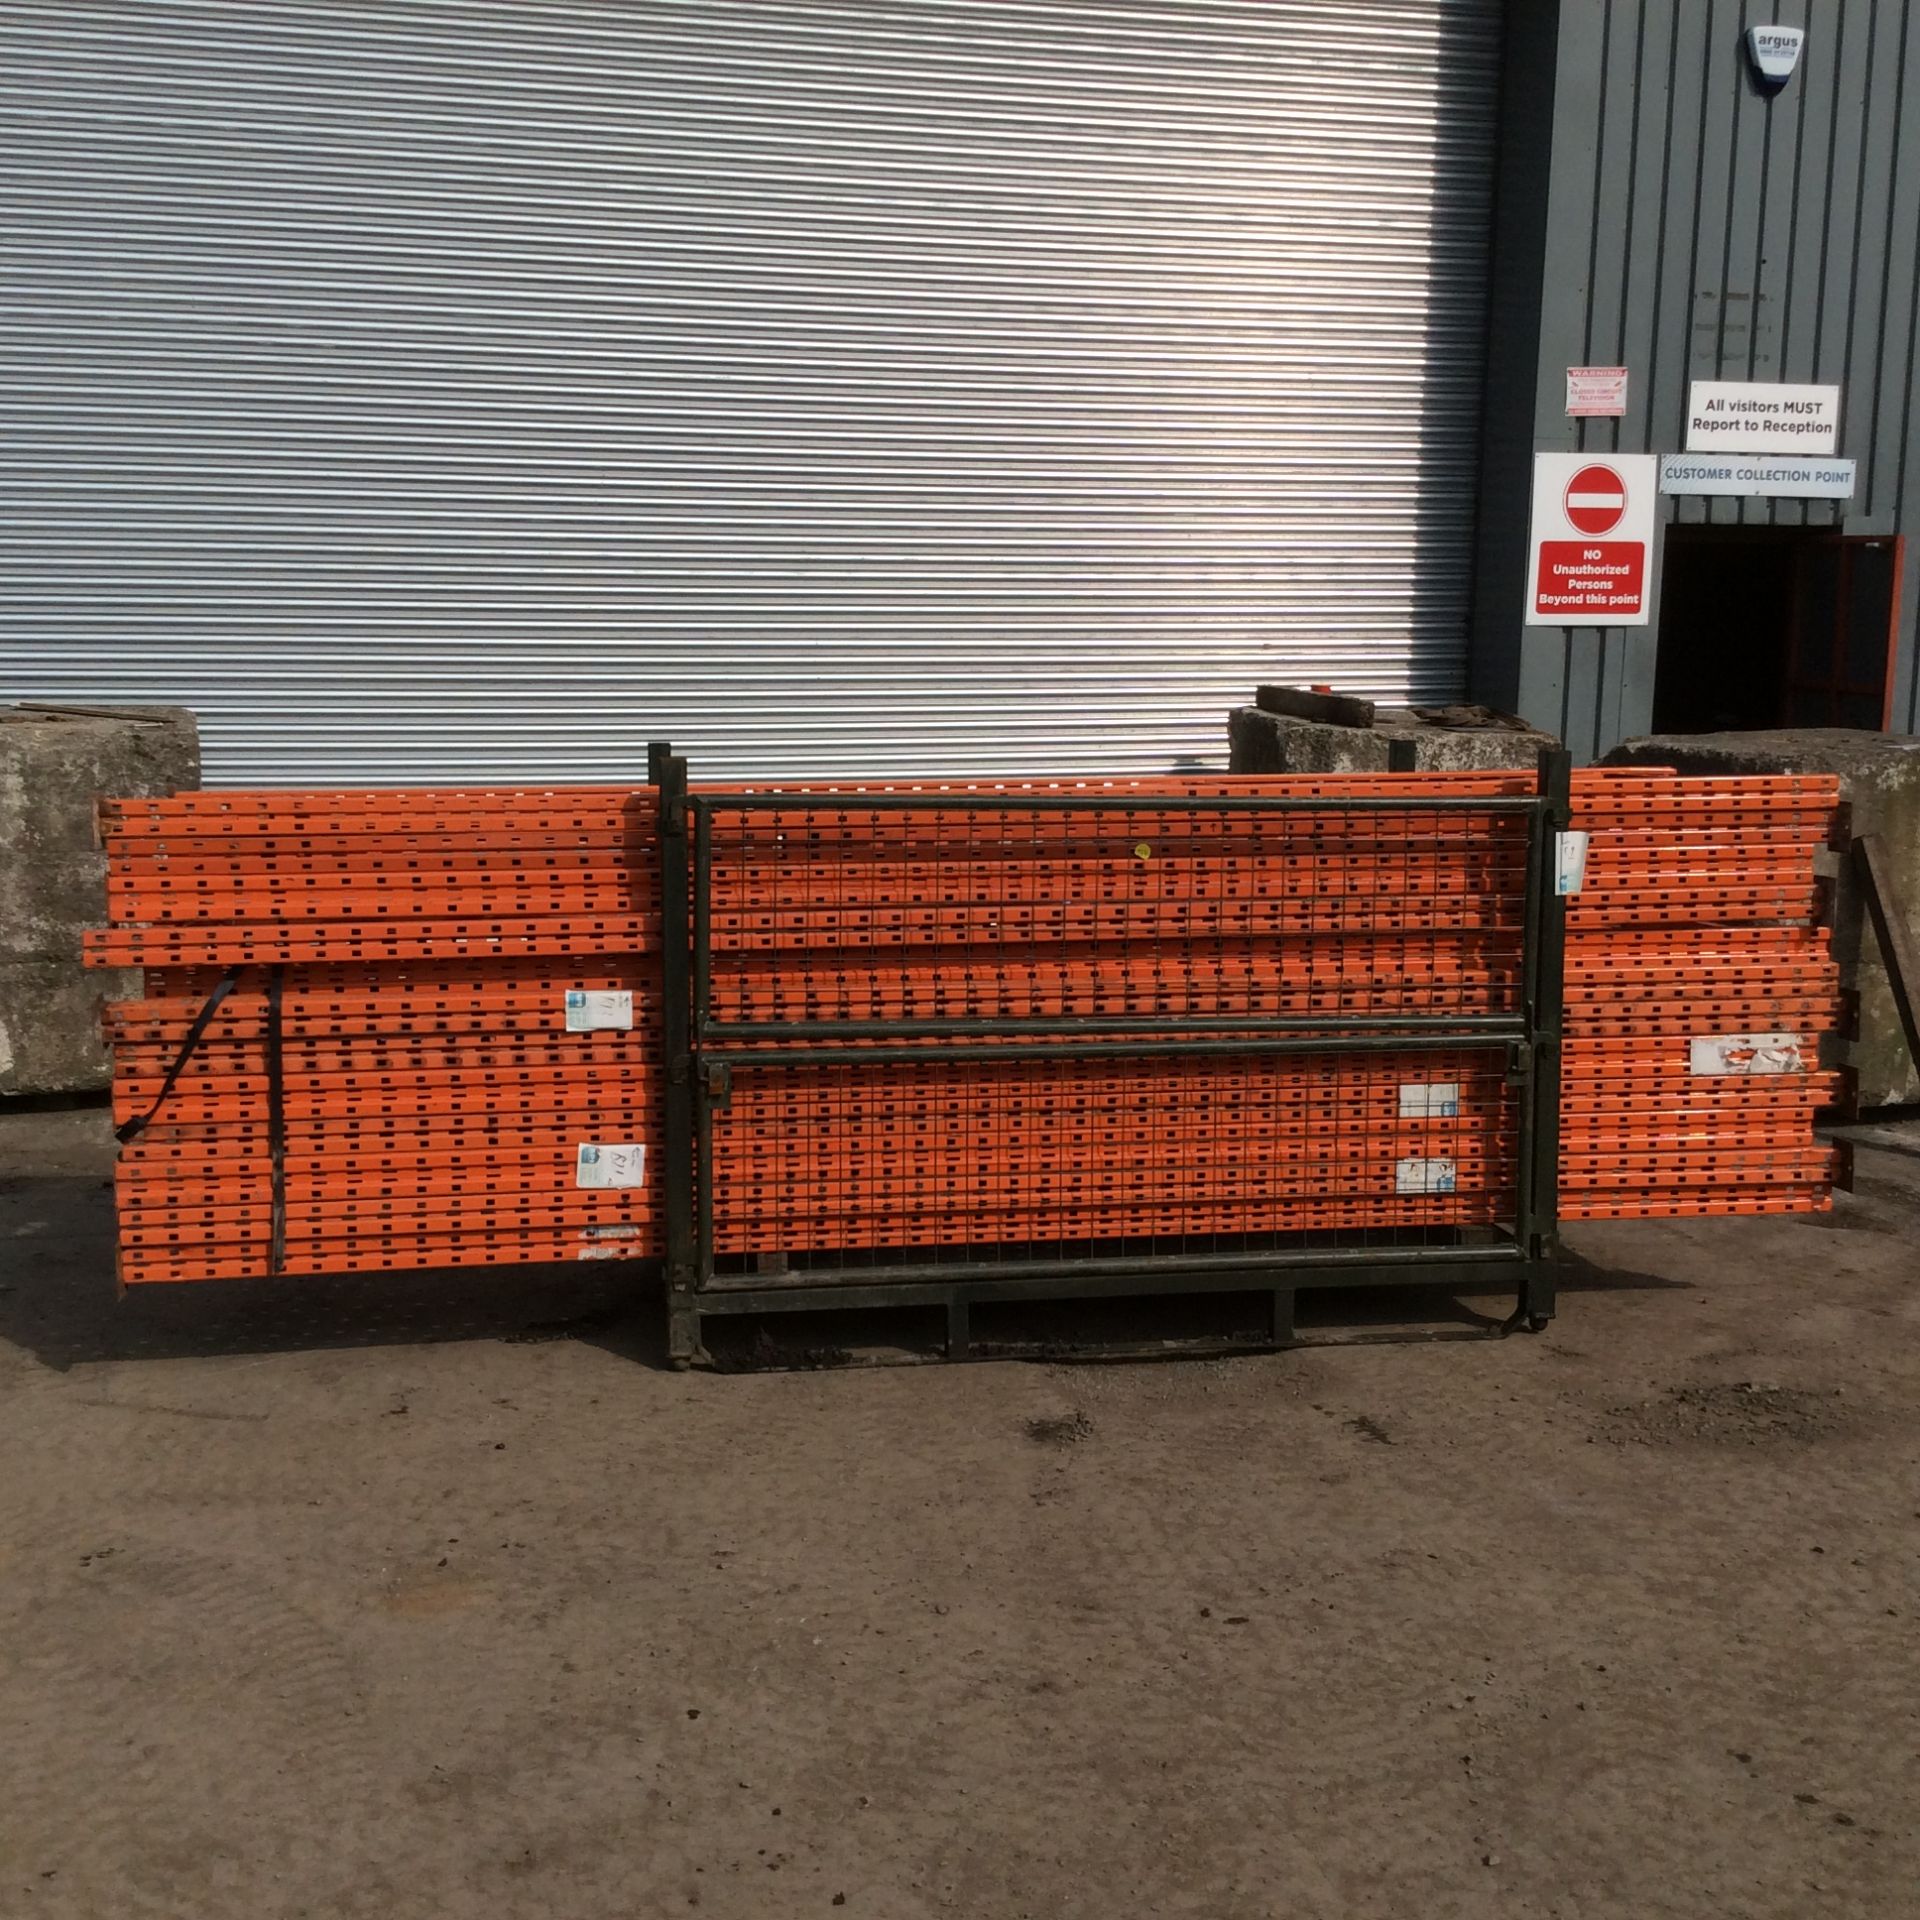 Pallet Racking Included is x12 Uprights - 440cm Height And x86 Beams - 266cm Inside Width. - Image 4 of 7